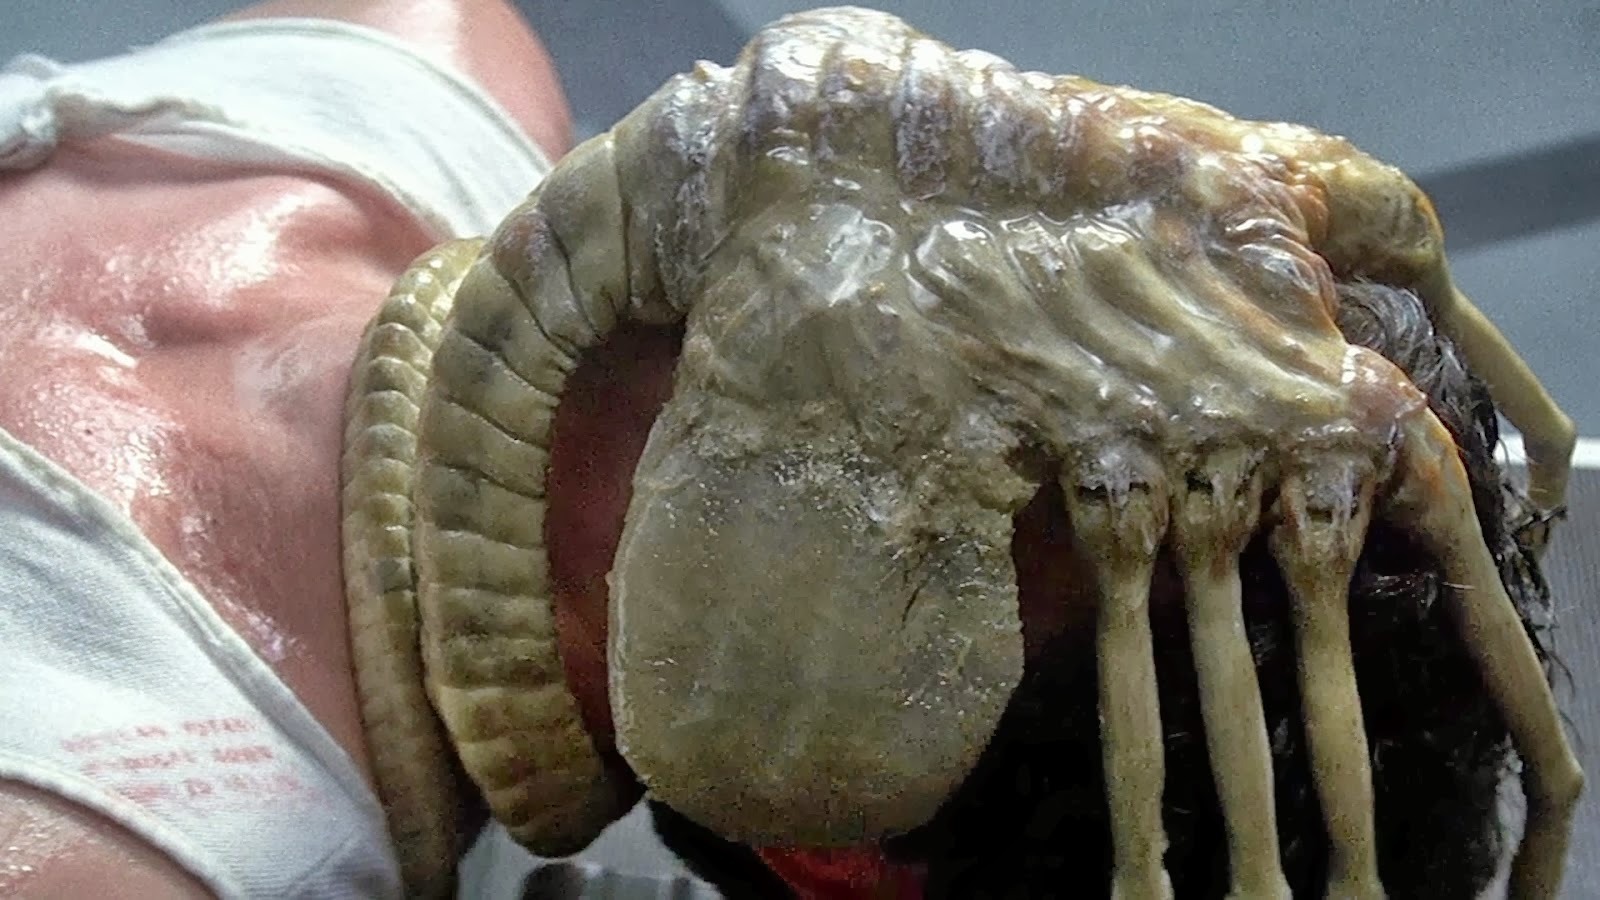 Alien: Fede Alvarez celebrates Alien Day by anticipating the return of the Facehuggers in his reboot